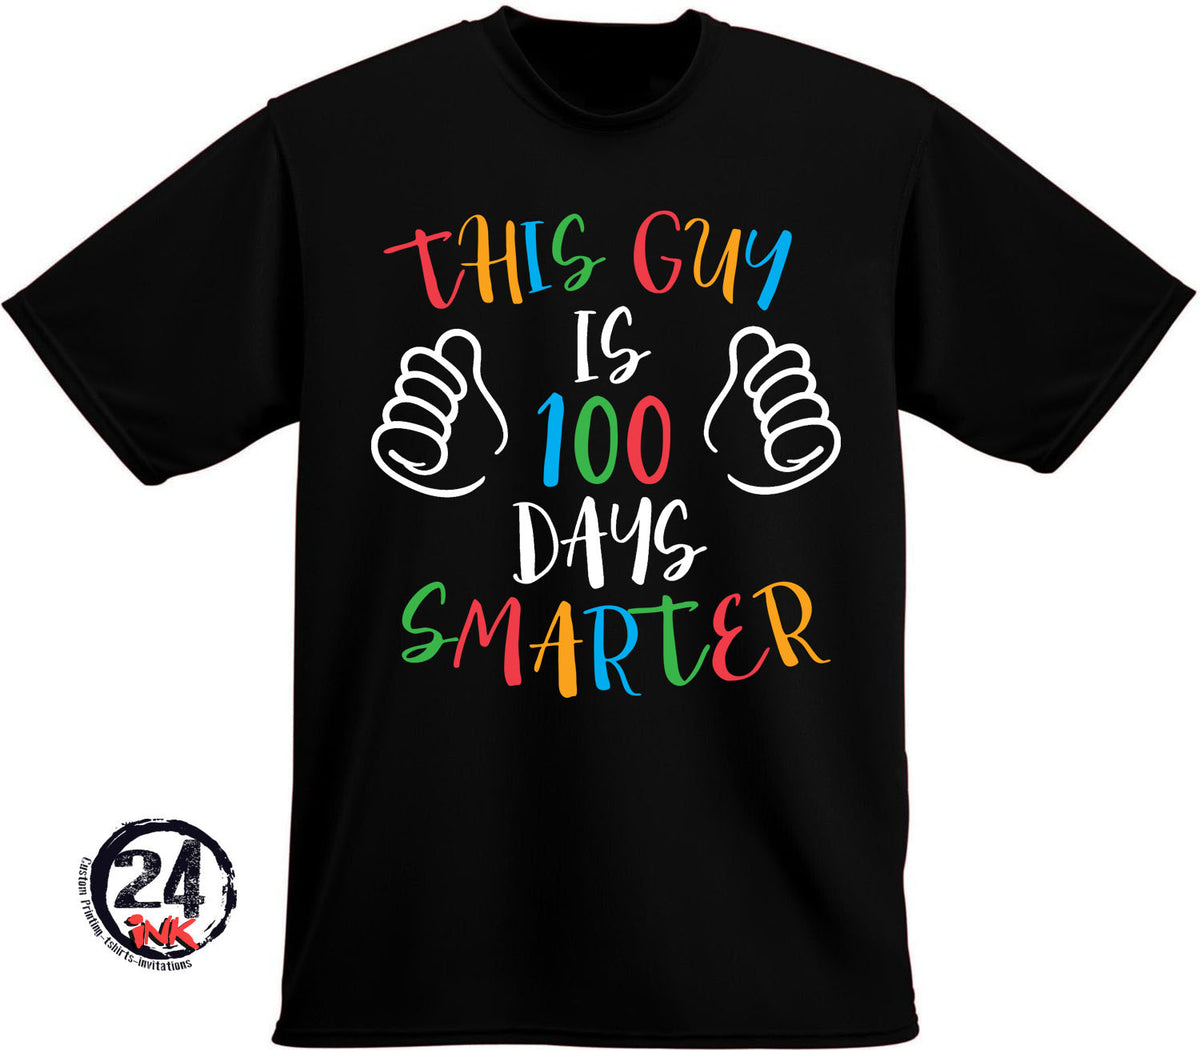 This guy is 100 days smarter, 100 days of School T-shirt